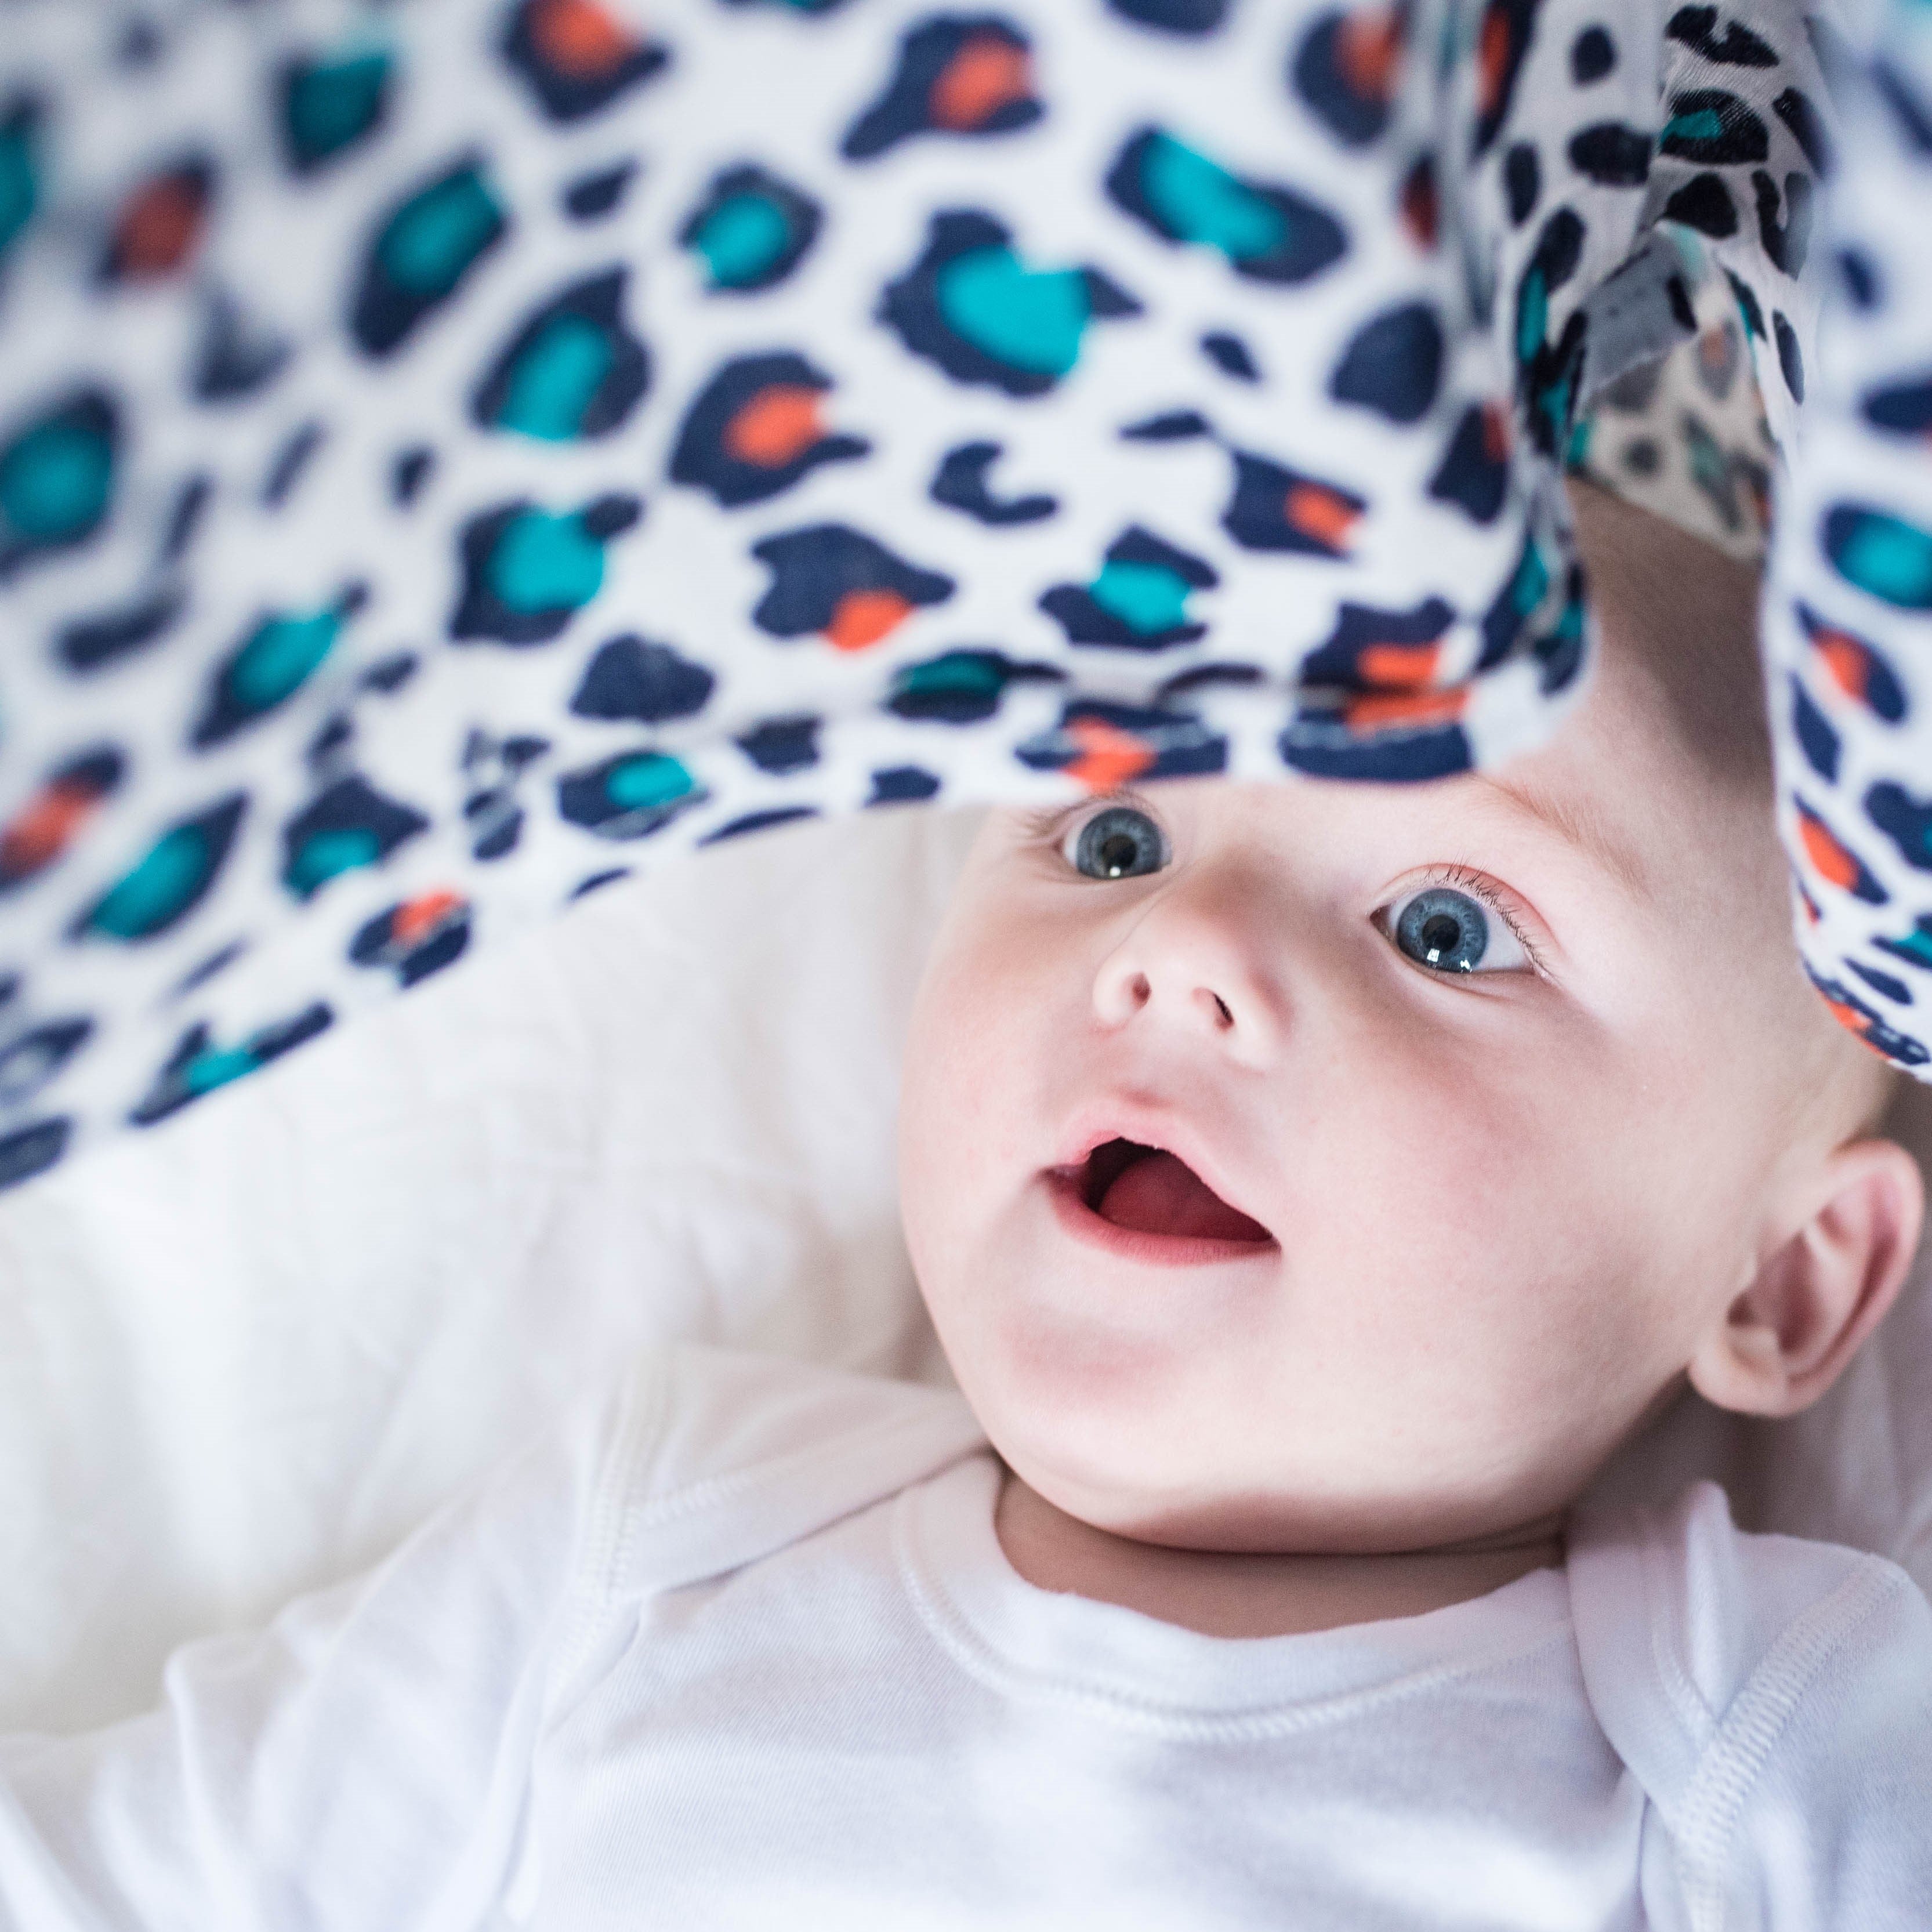 Baby Vision Development: What Can Your Baby See at Different Ages?